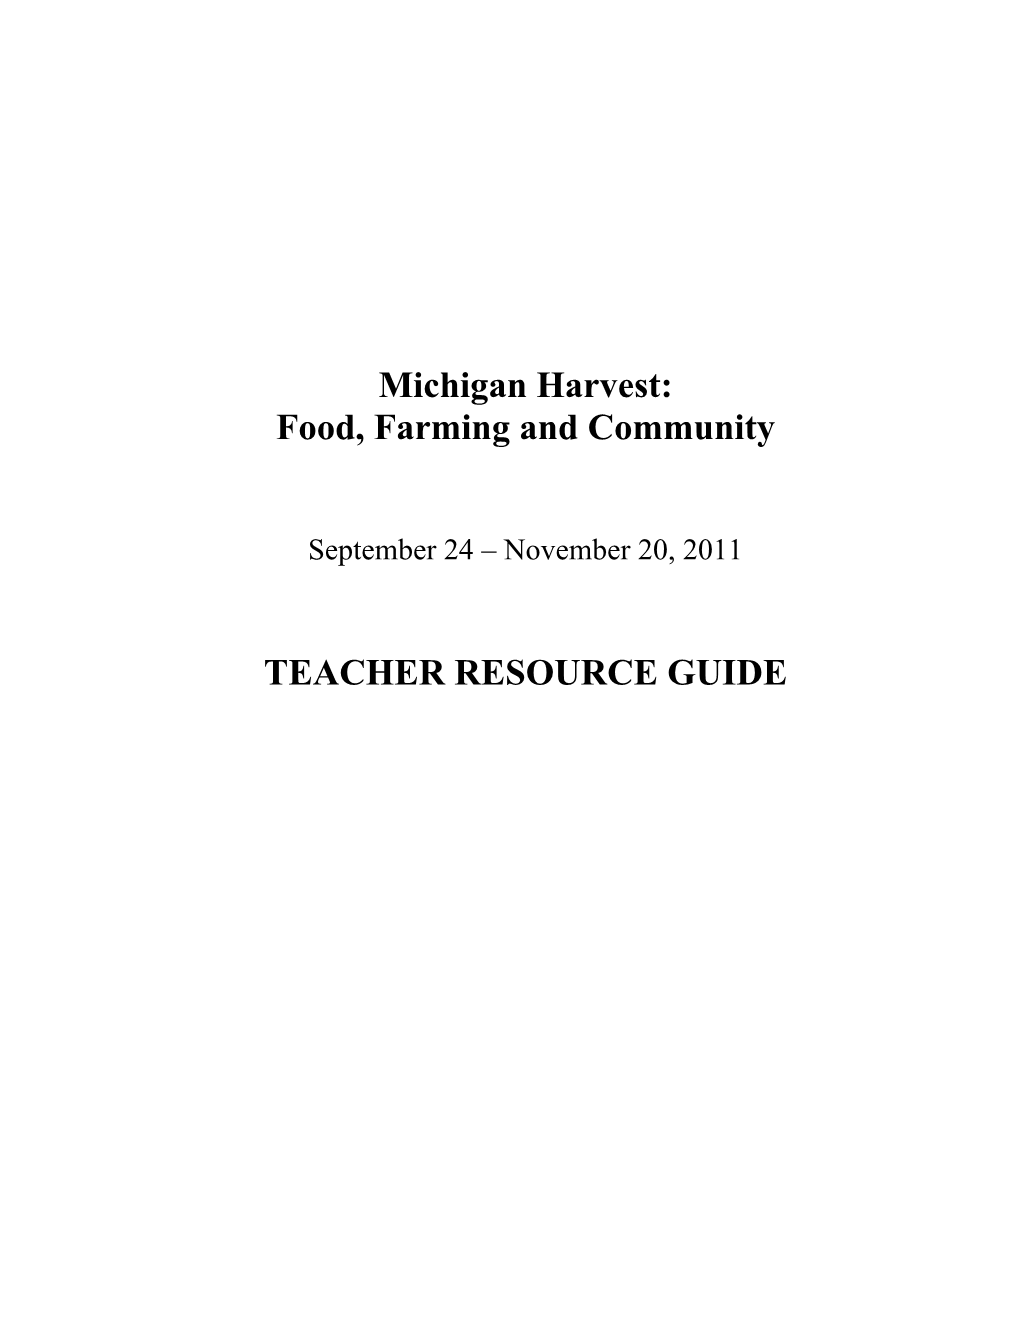 Michigan Harvest: Food, Farming and Community TEACHER RESOURCE GUIDE